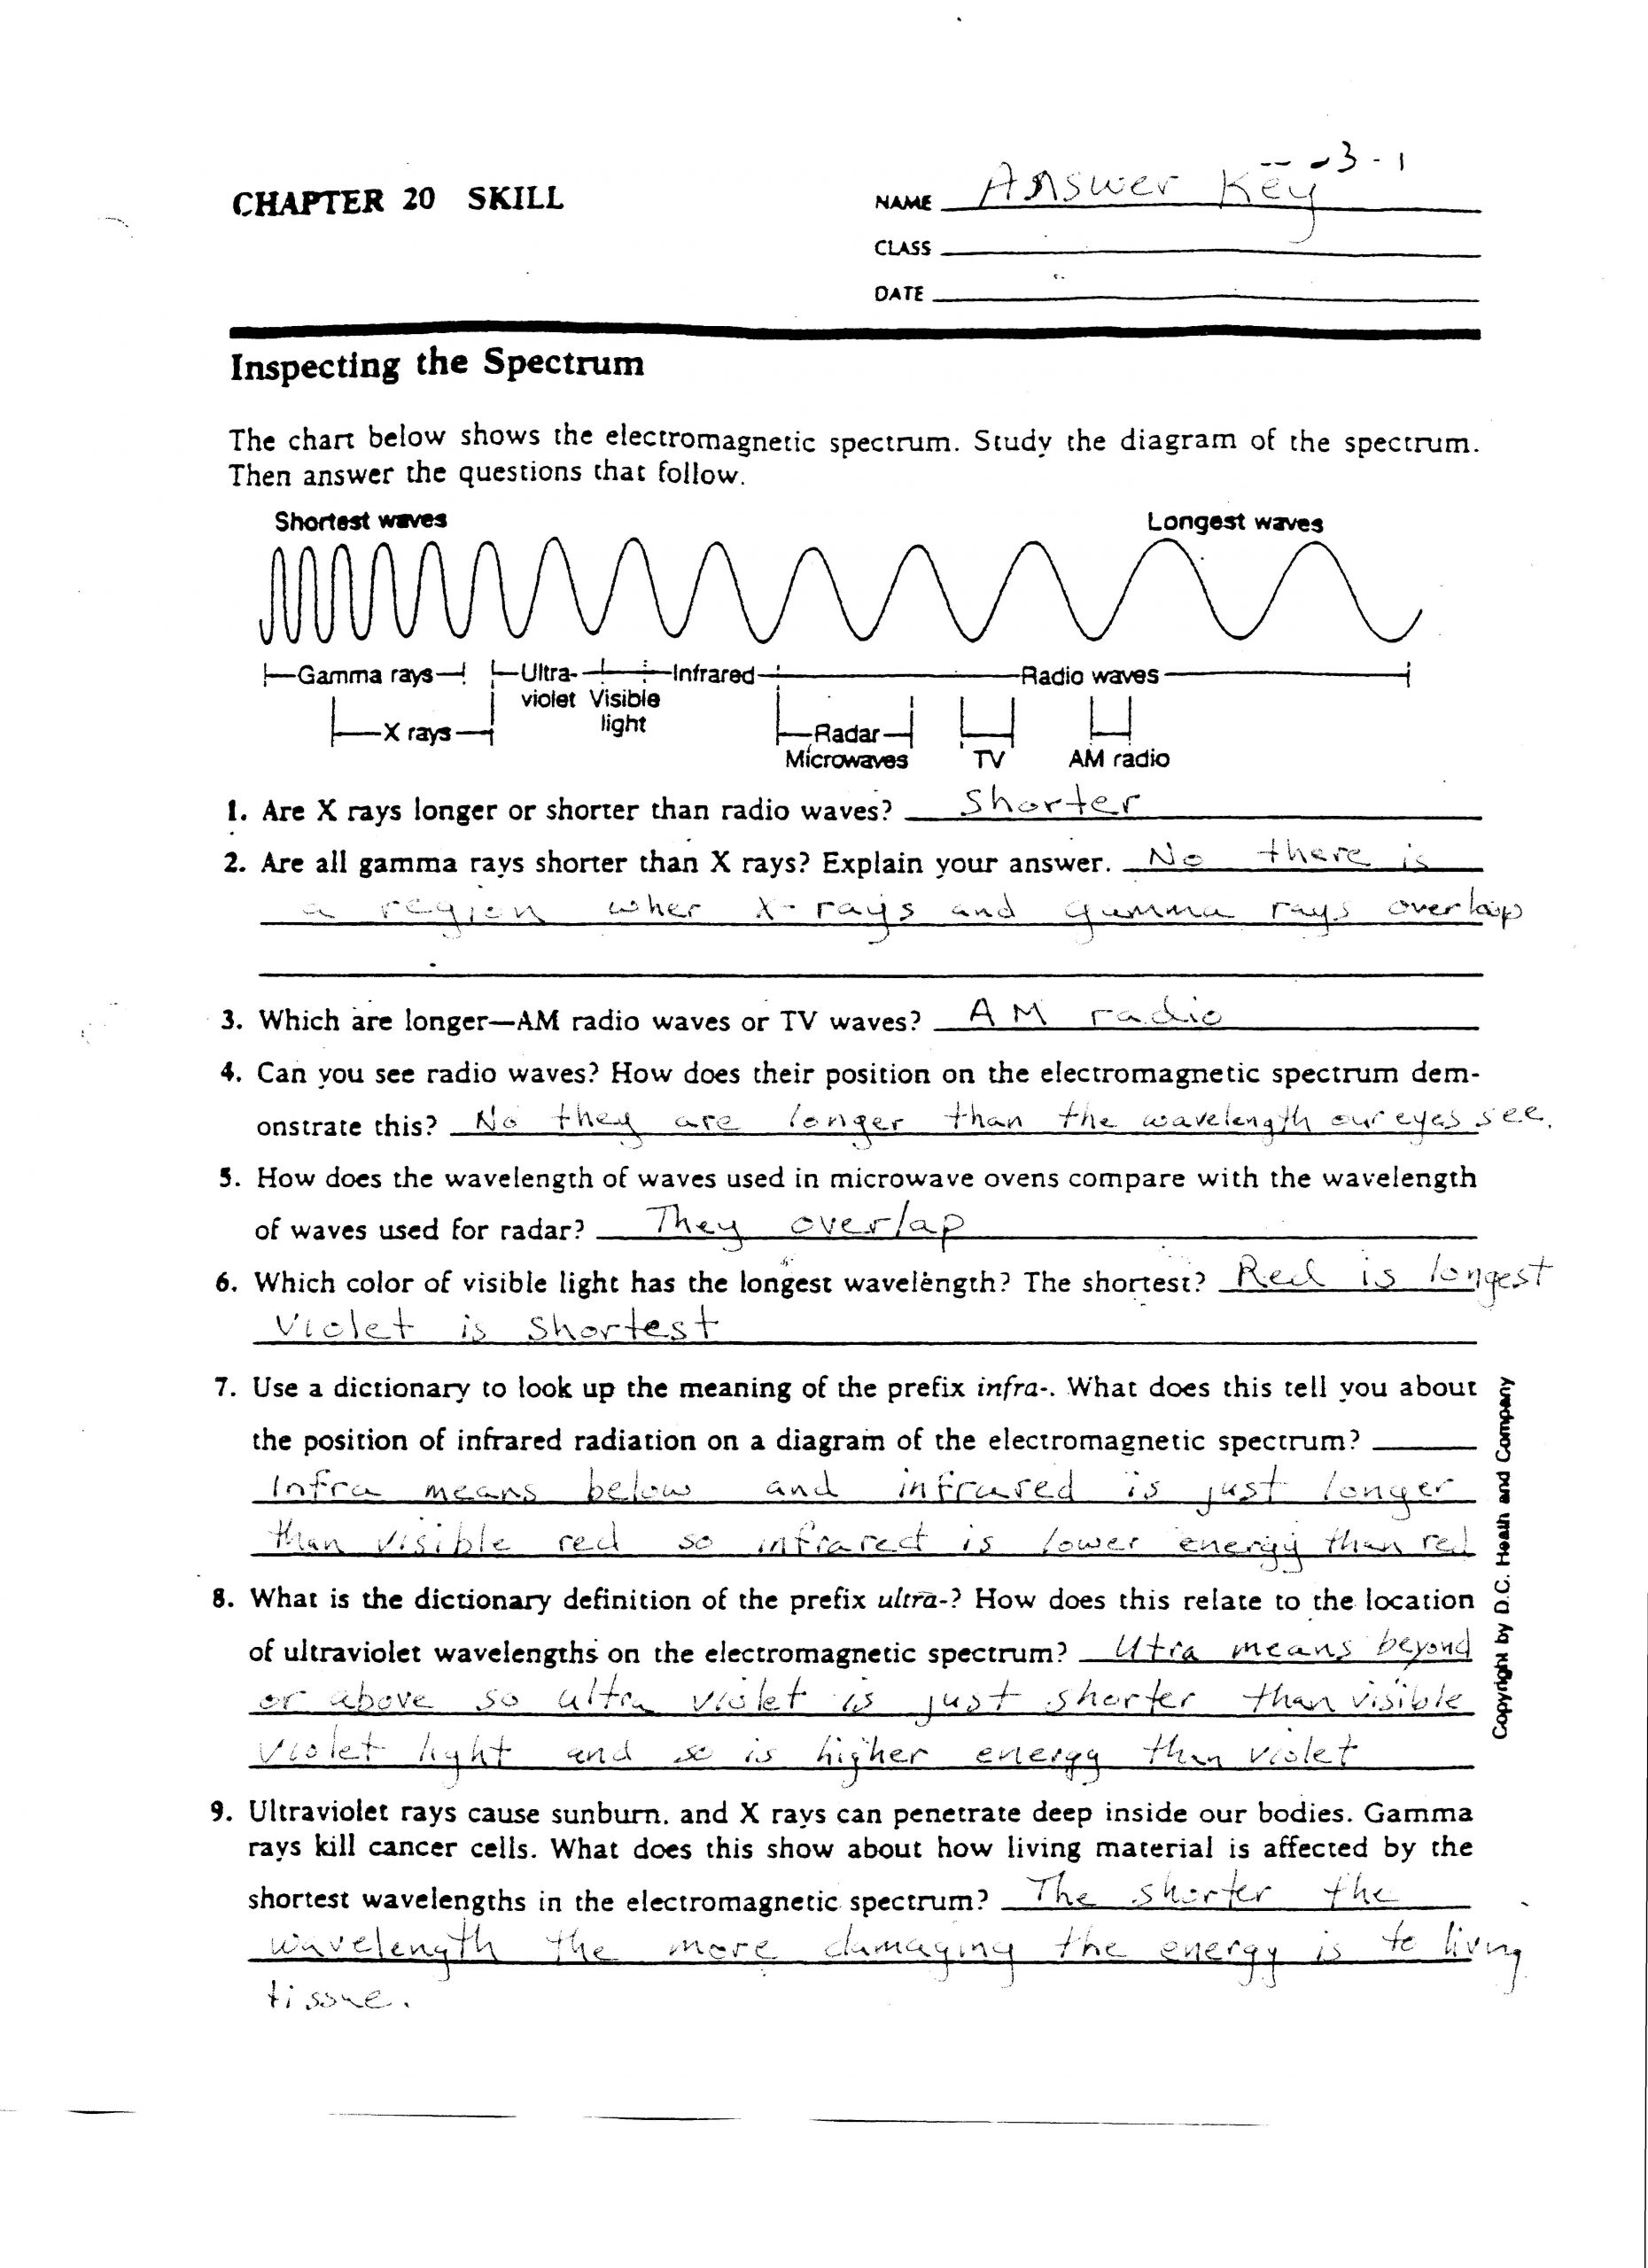 The Electromagnetic Spectrum Worksheet Answers Electromagnetic Spectrum Worksheet